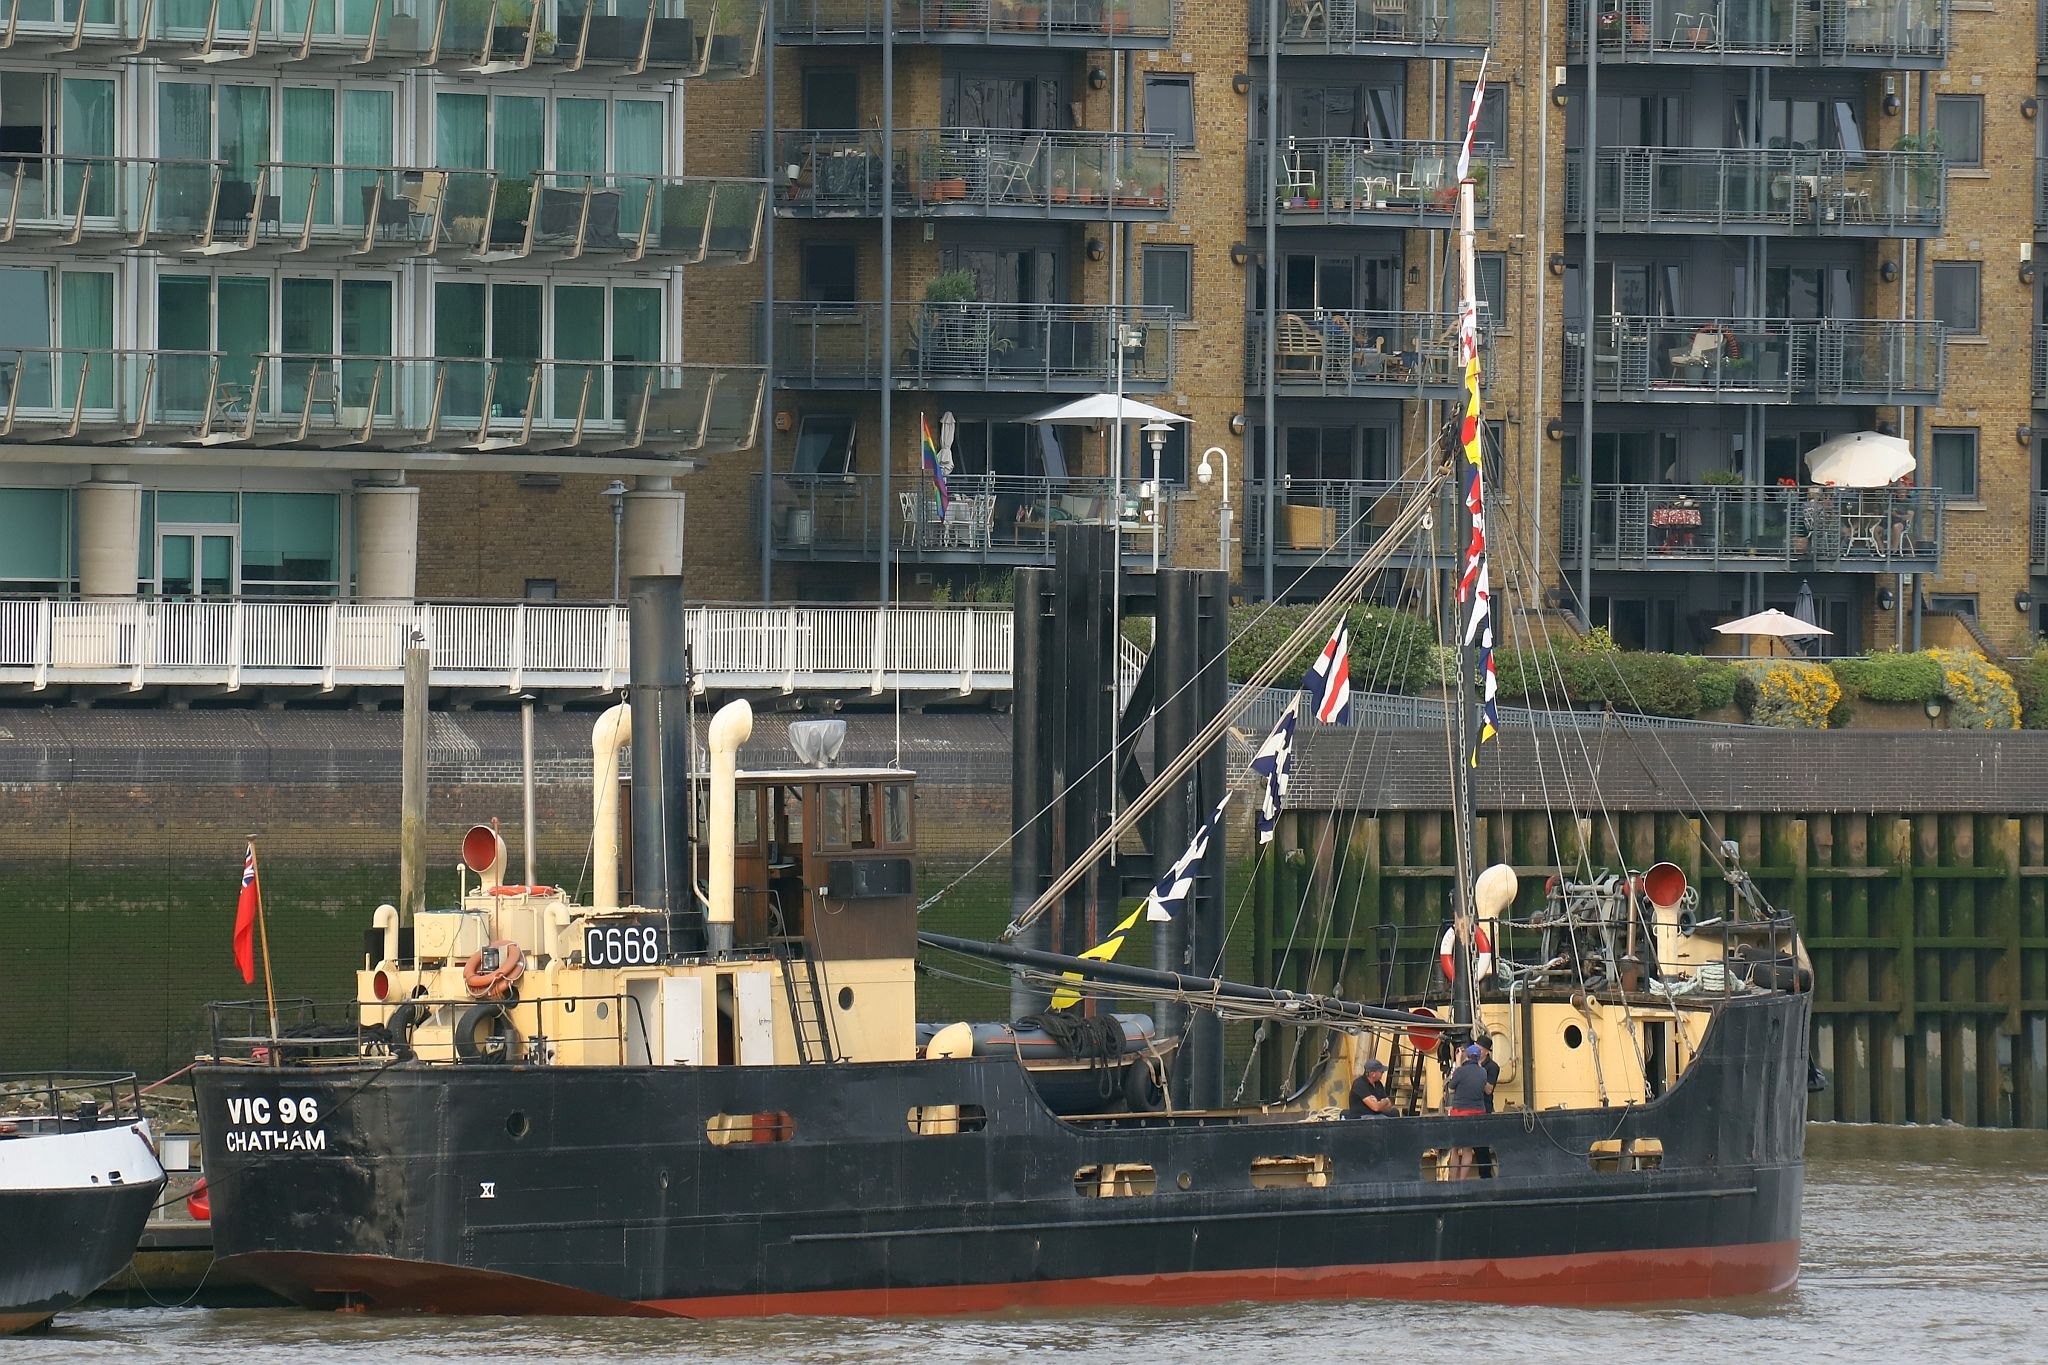 VIC 96 tied up alongside Hermitage Moorings in central London by Tower Bridge. Steam powered ship VIC 96 visited central London in June 2023.